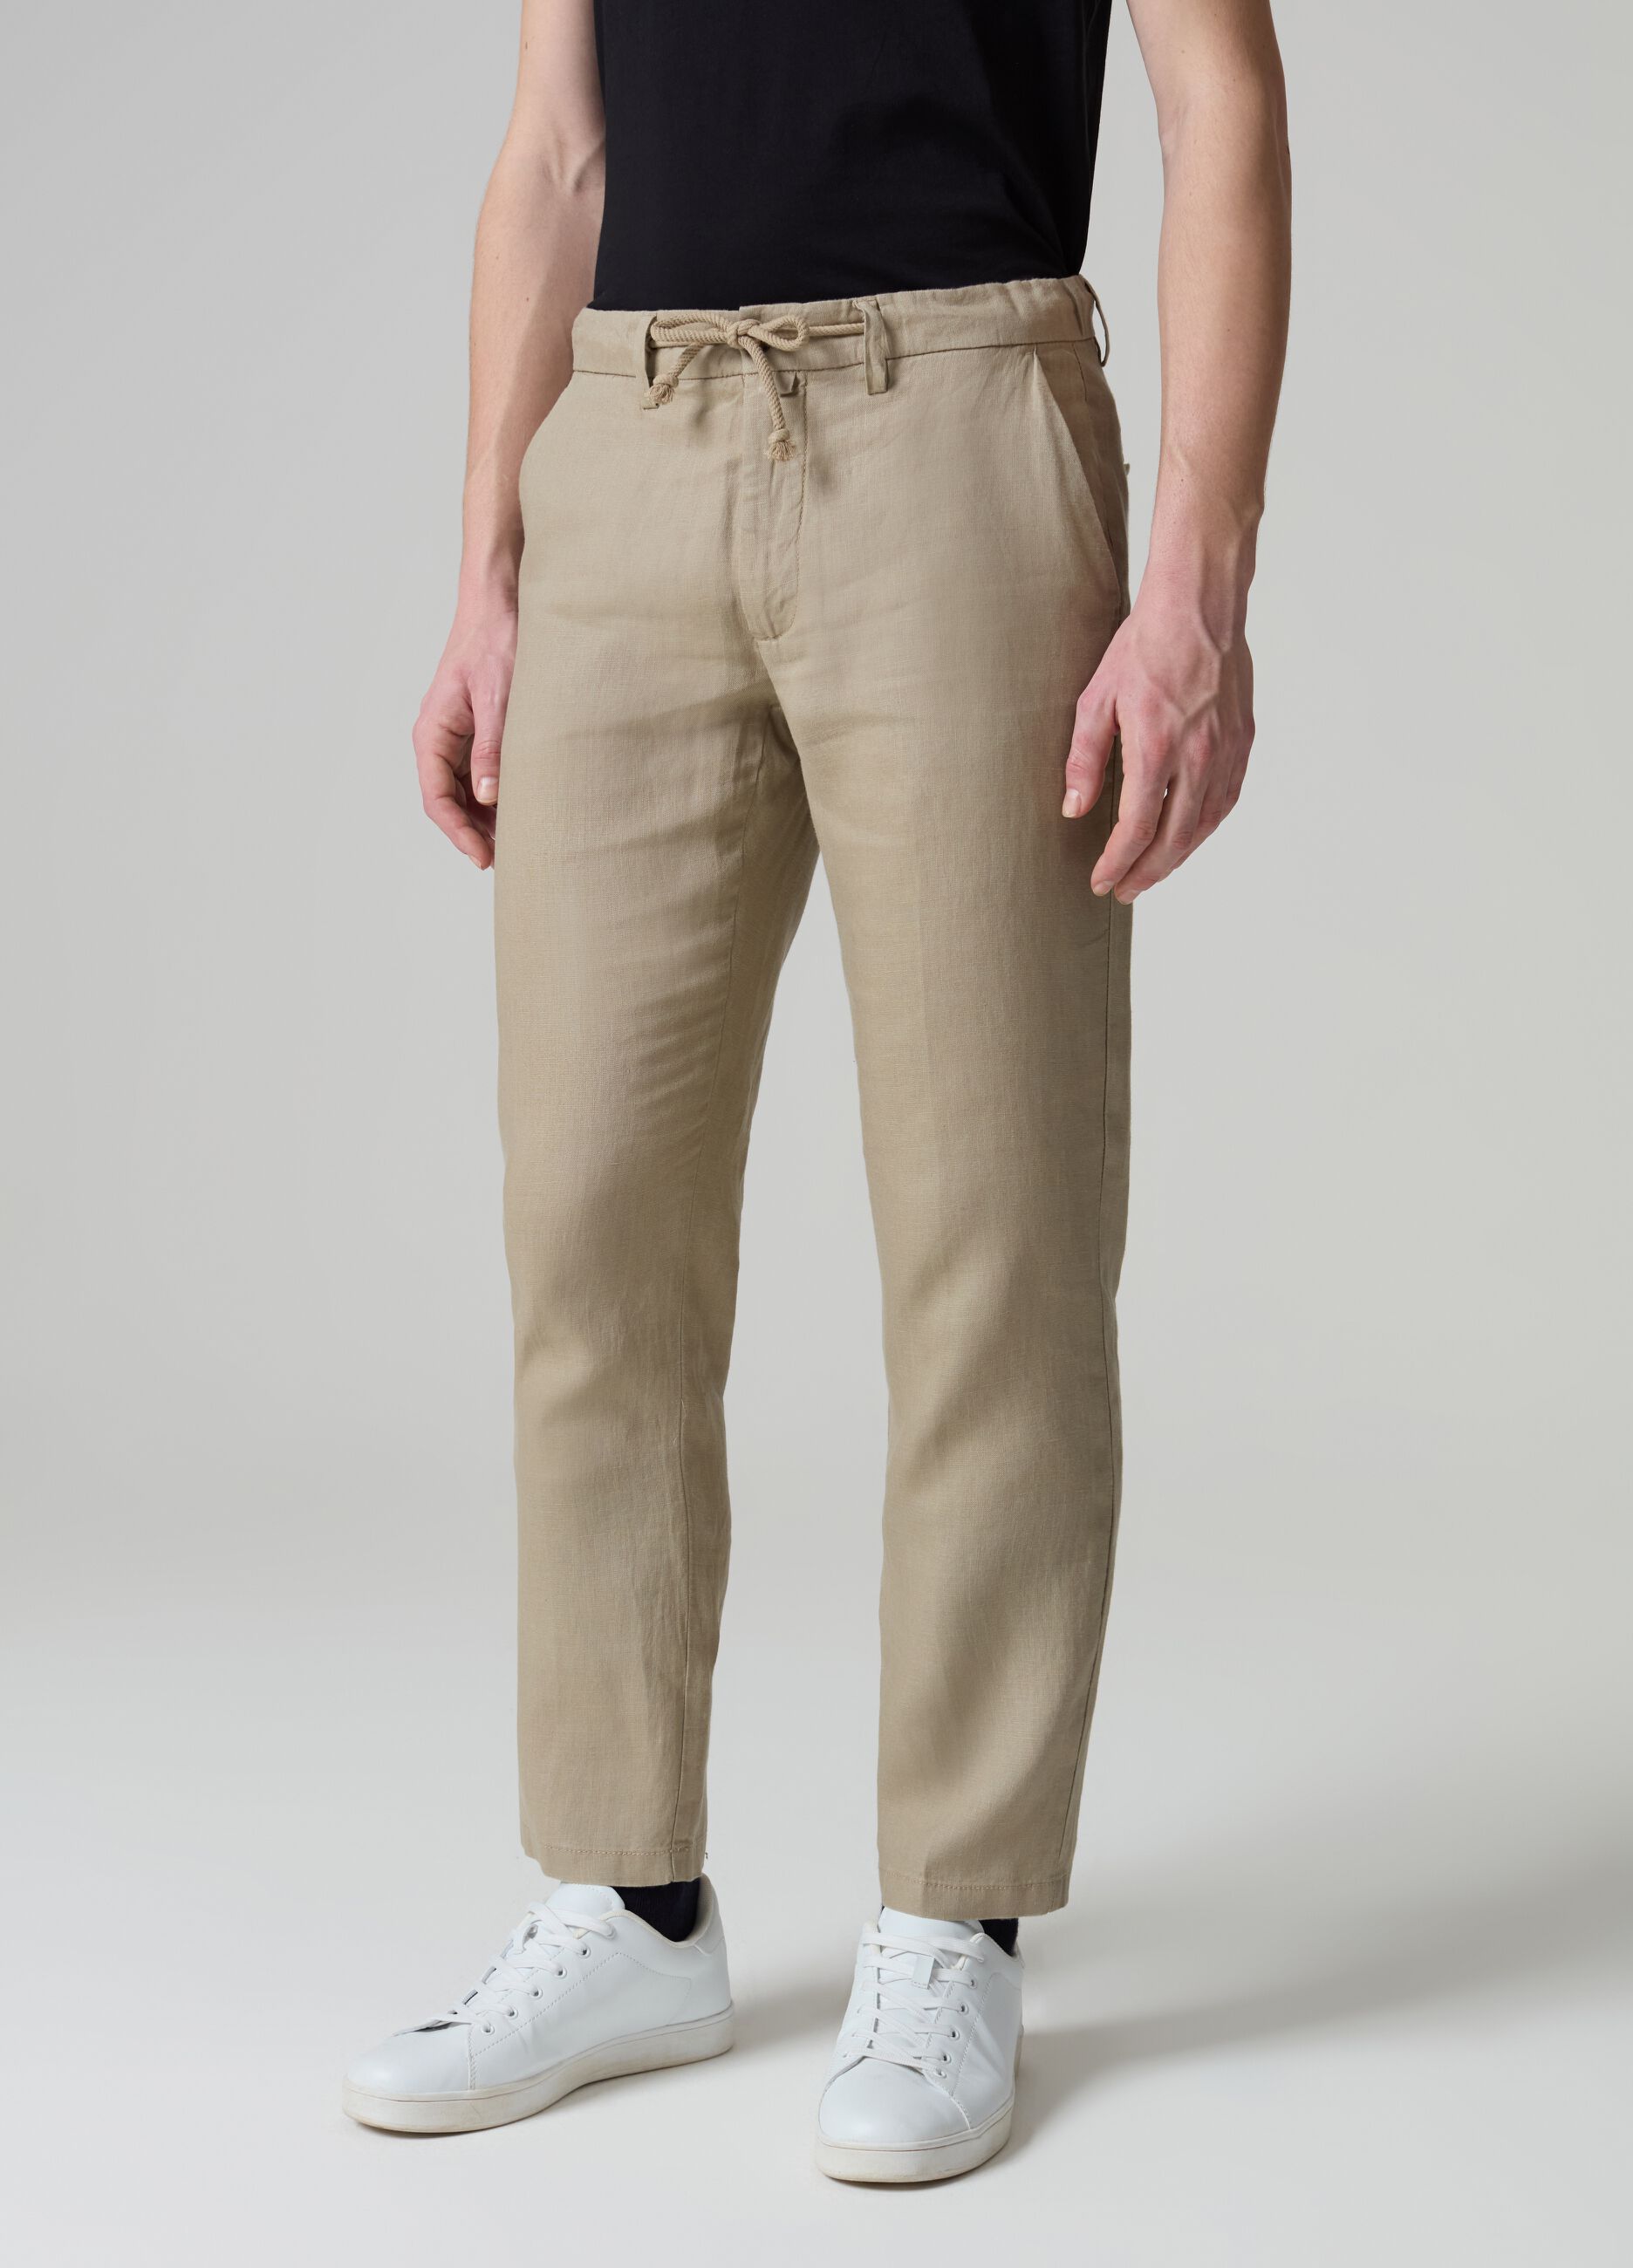 Pantalone chino in lino con coulisse